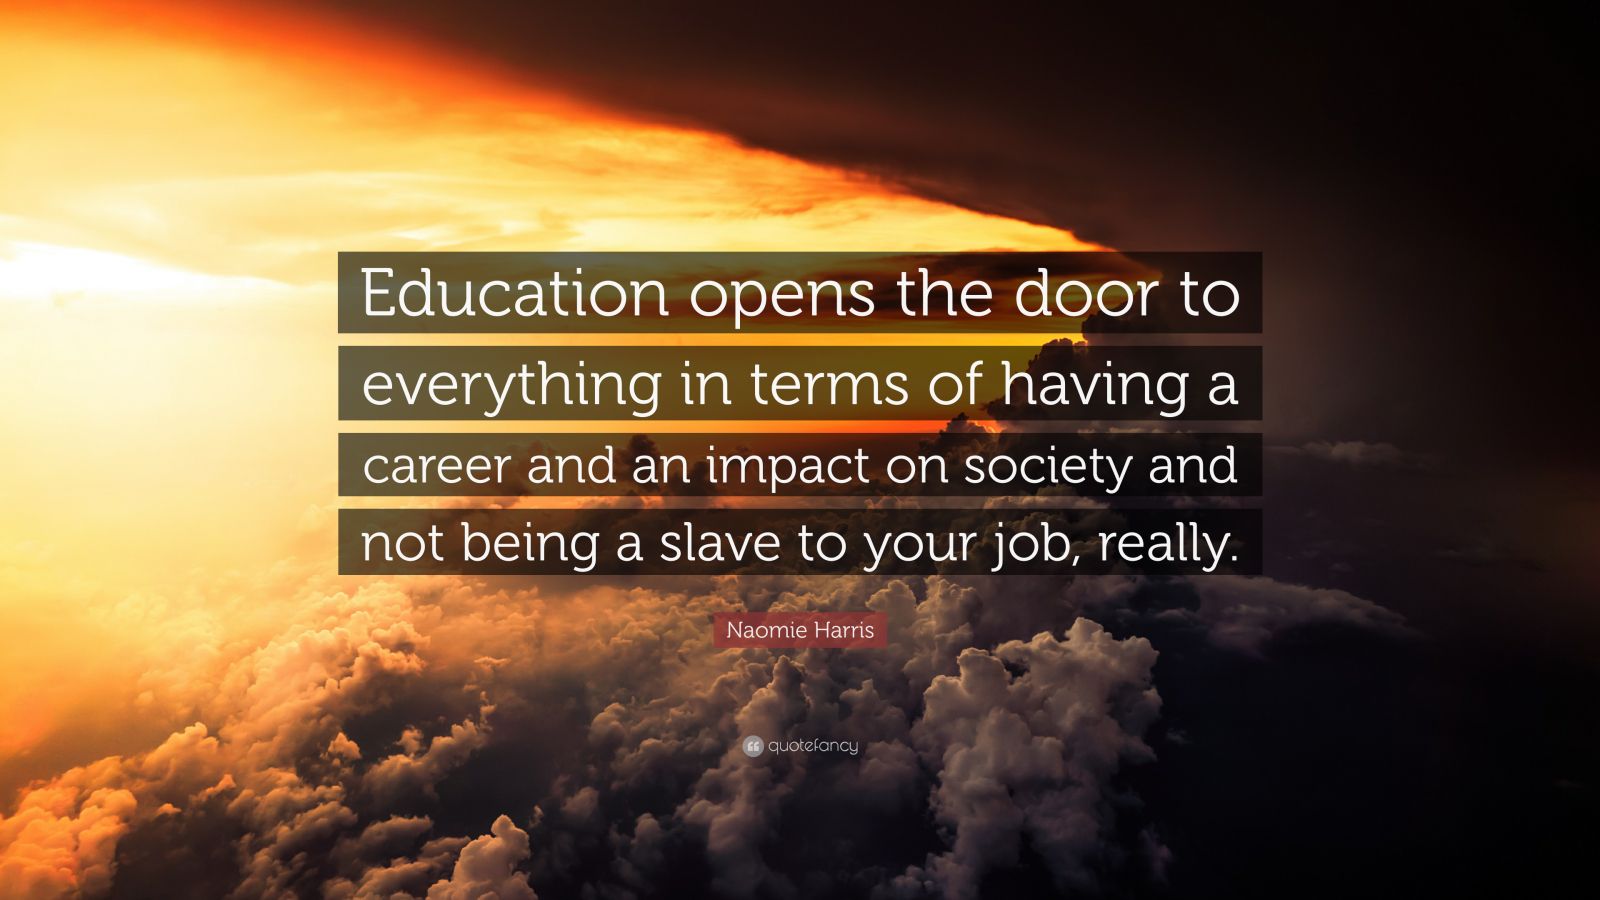 a good education opens doors for you essay